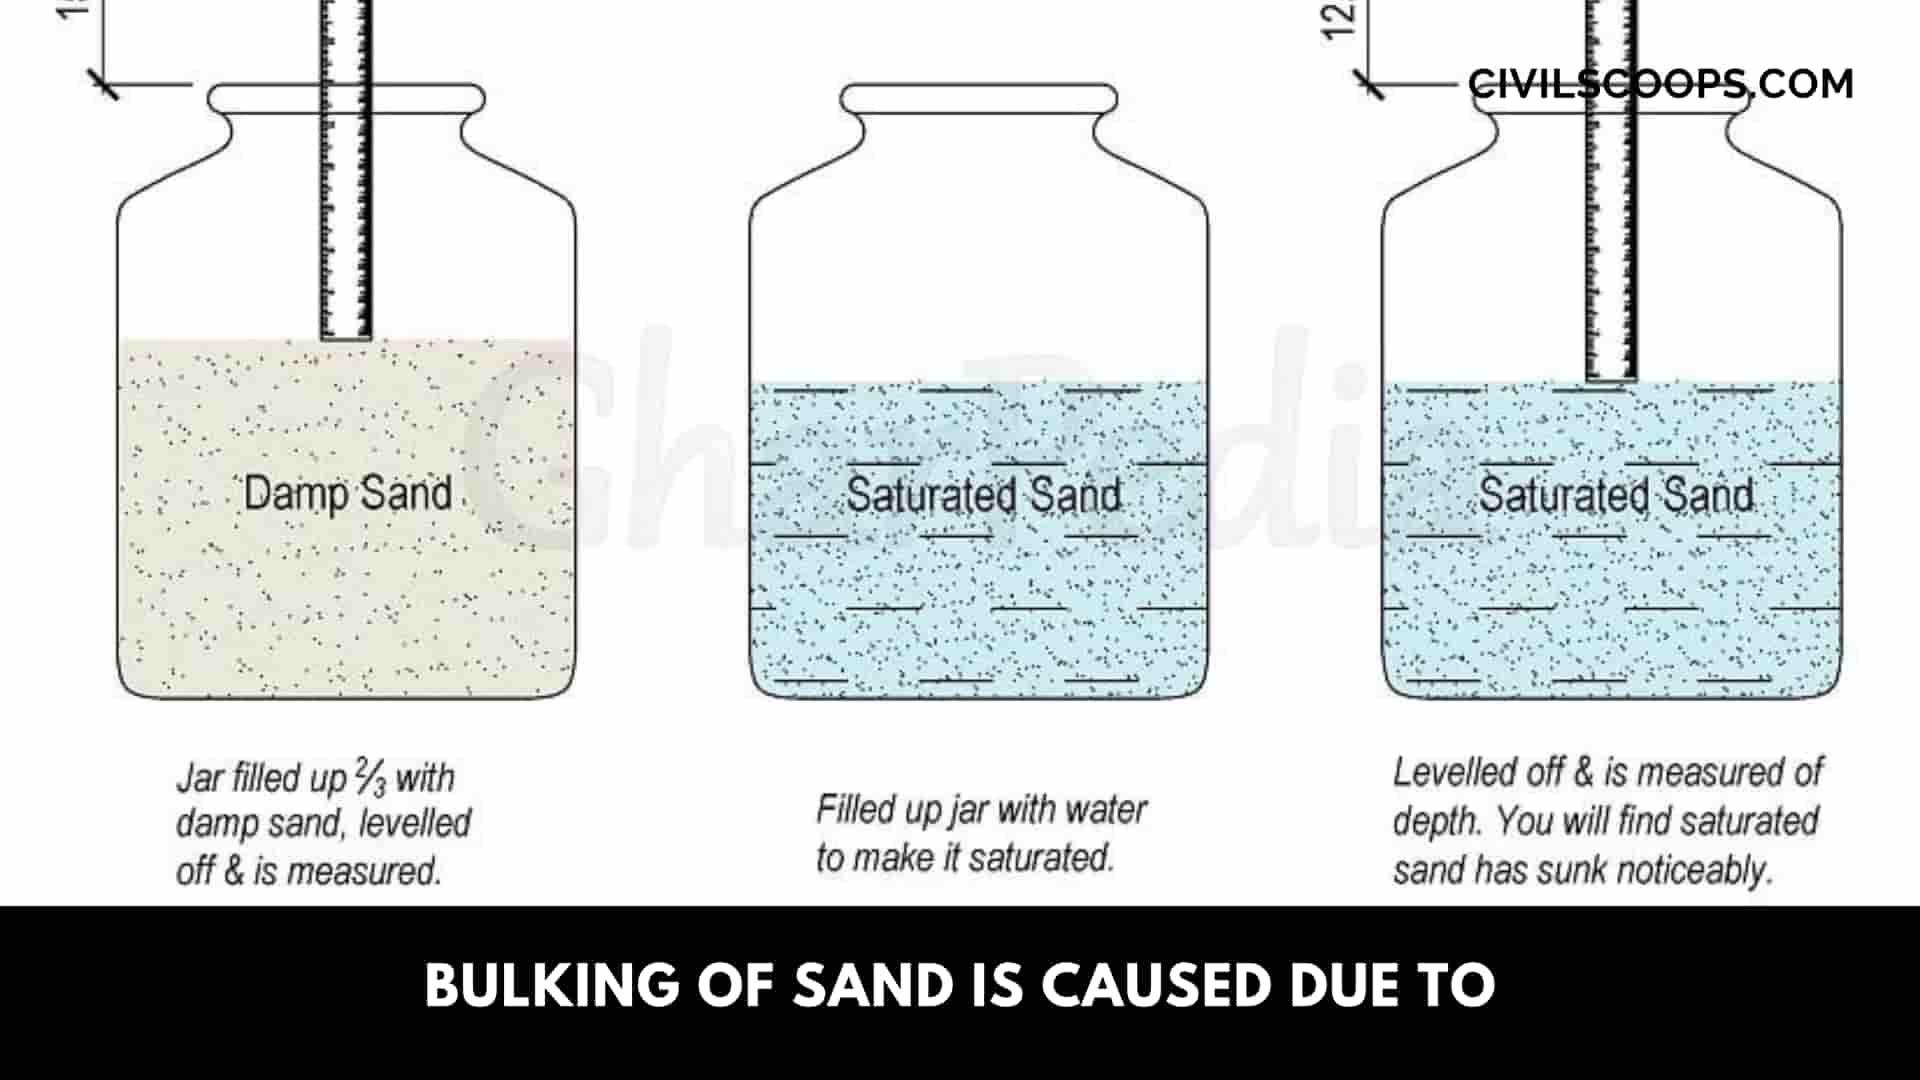 Bulking of Sand Is Caused Due to